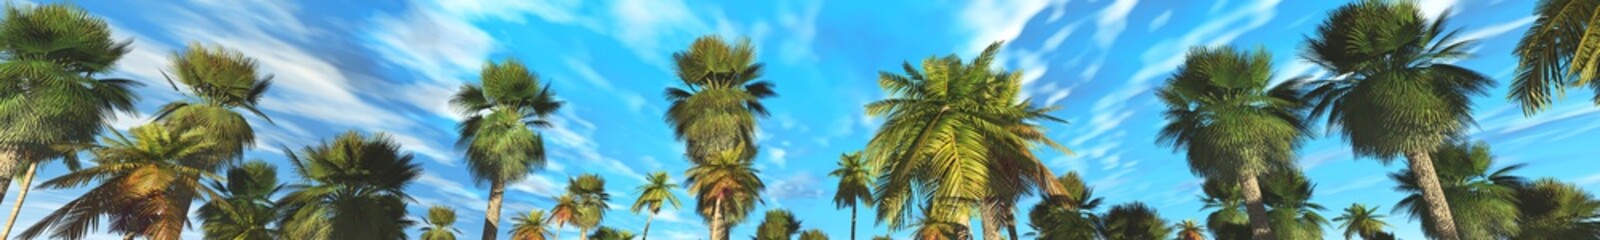 palm grove, panorama, 3D rendering.
Palm trees against the blue sky with clouds.
